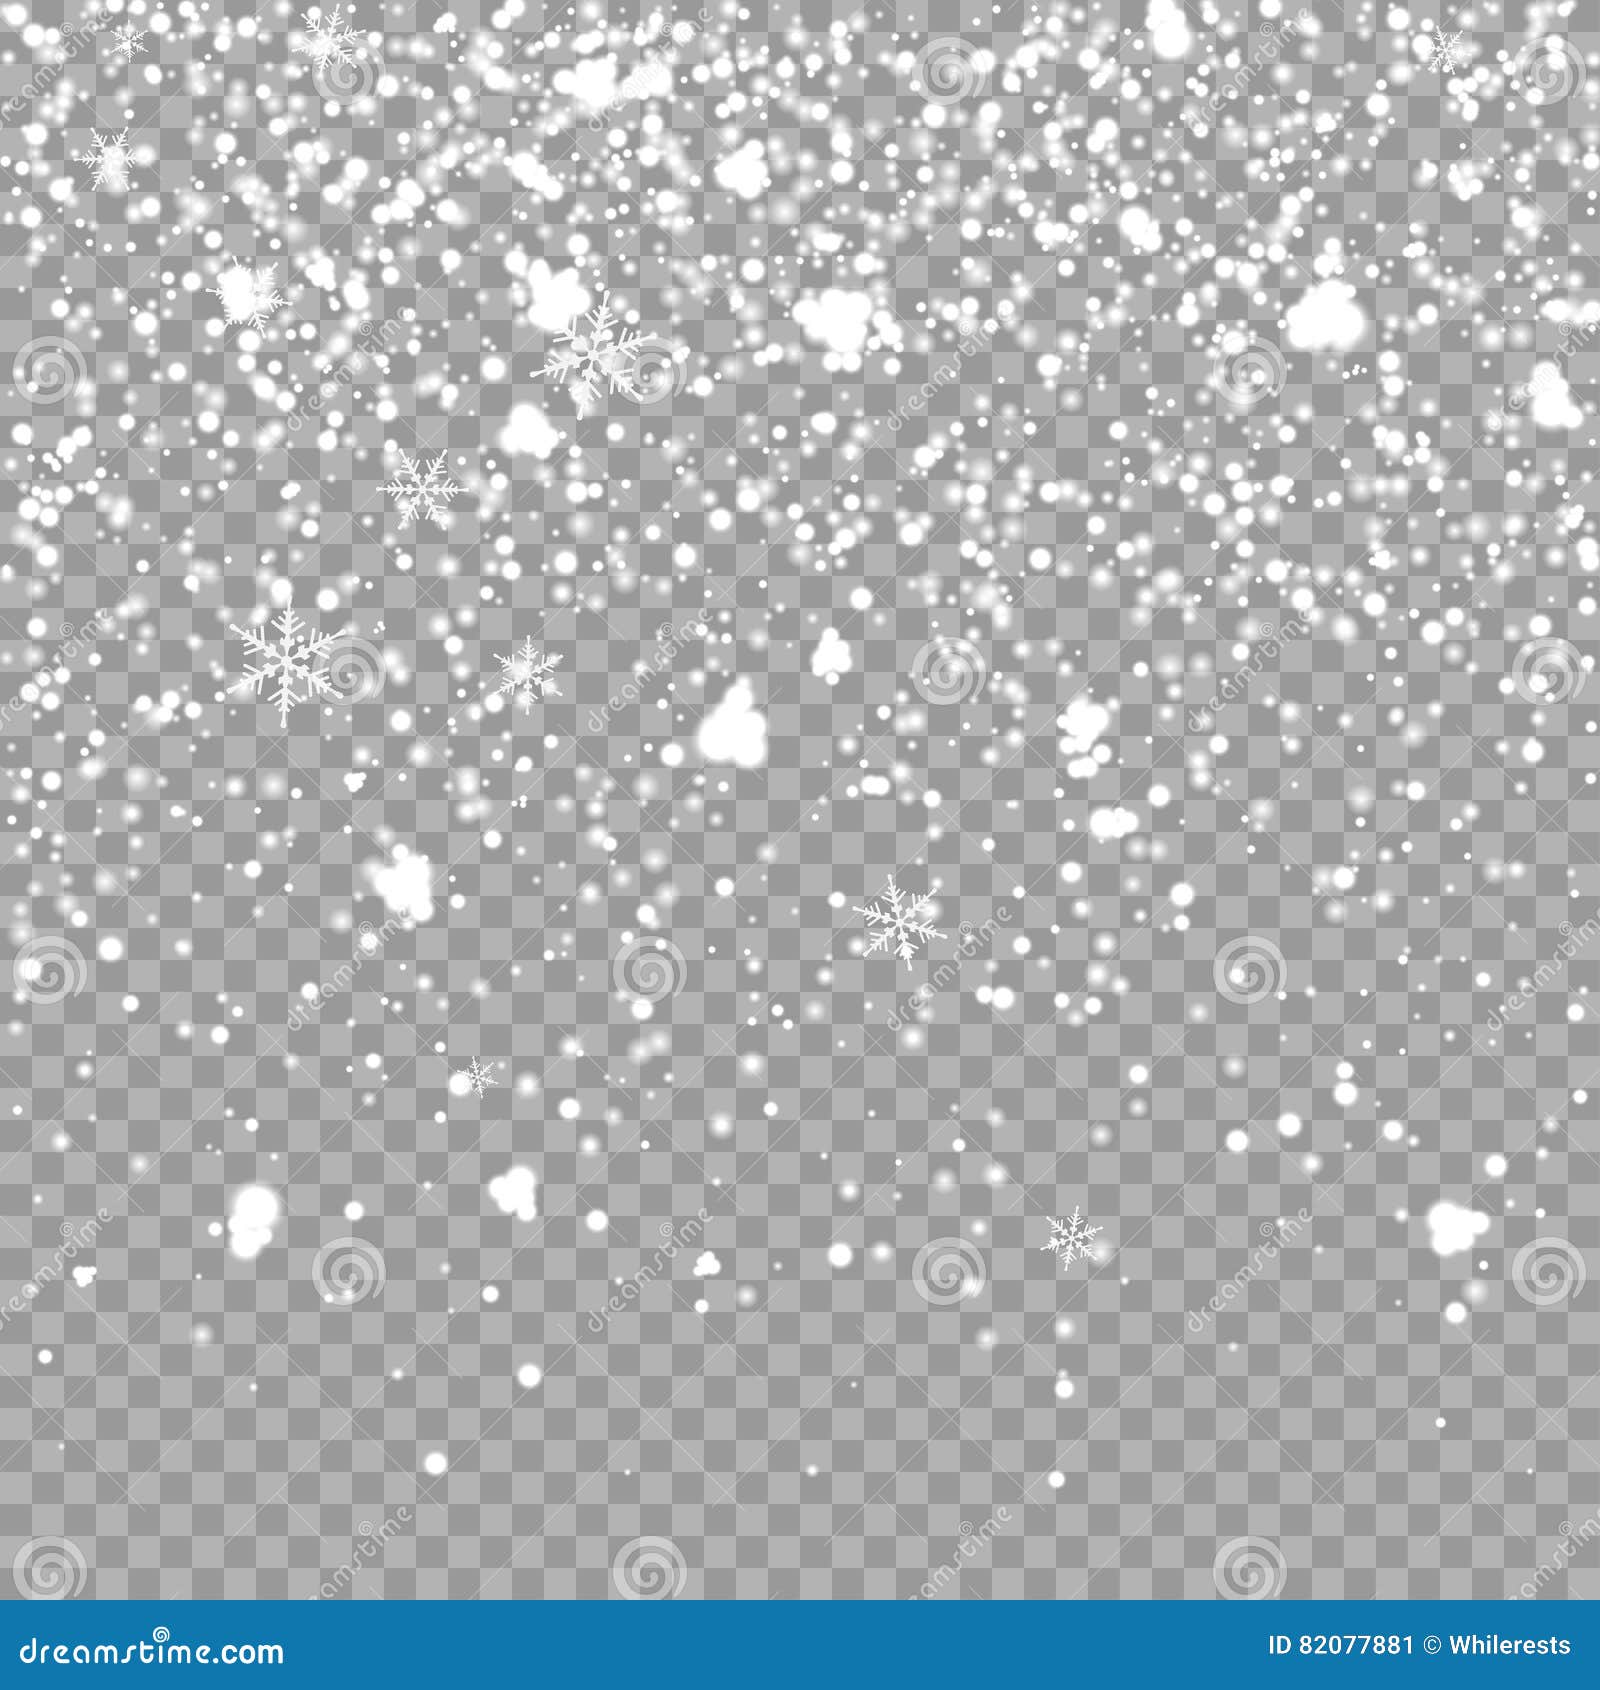 christmas falling snow overlay on transparent background. snowflakes storm layer. pattern for . snowfall